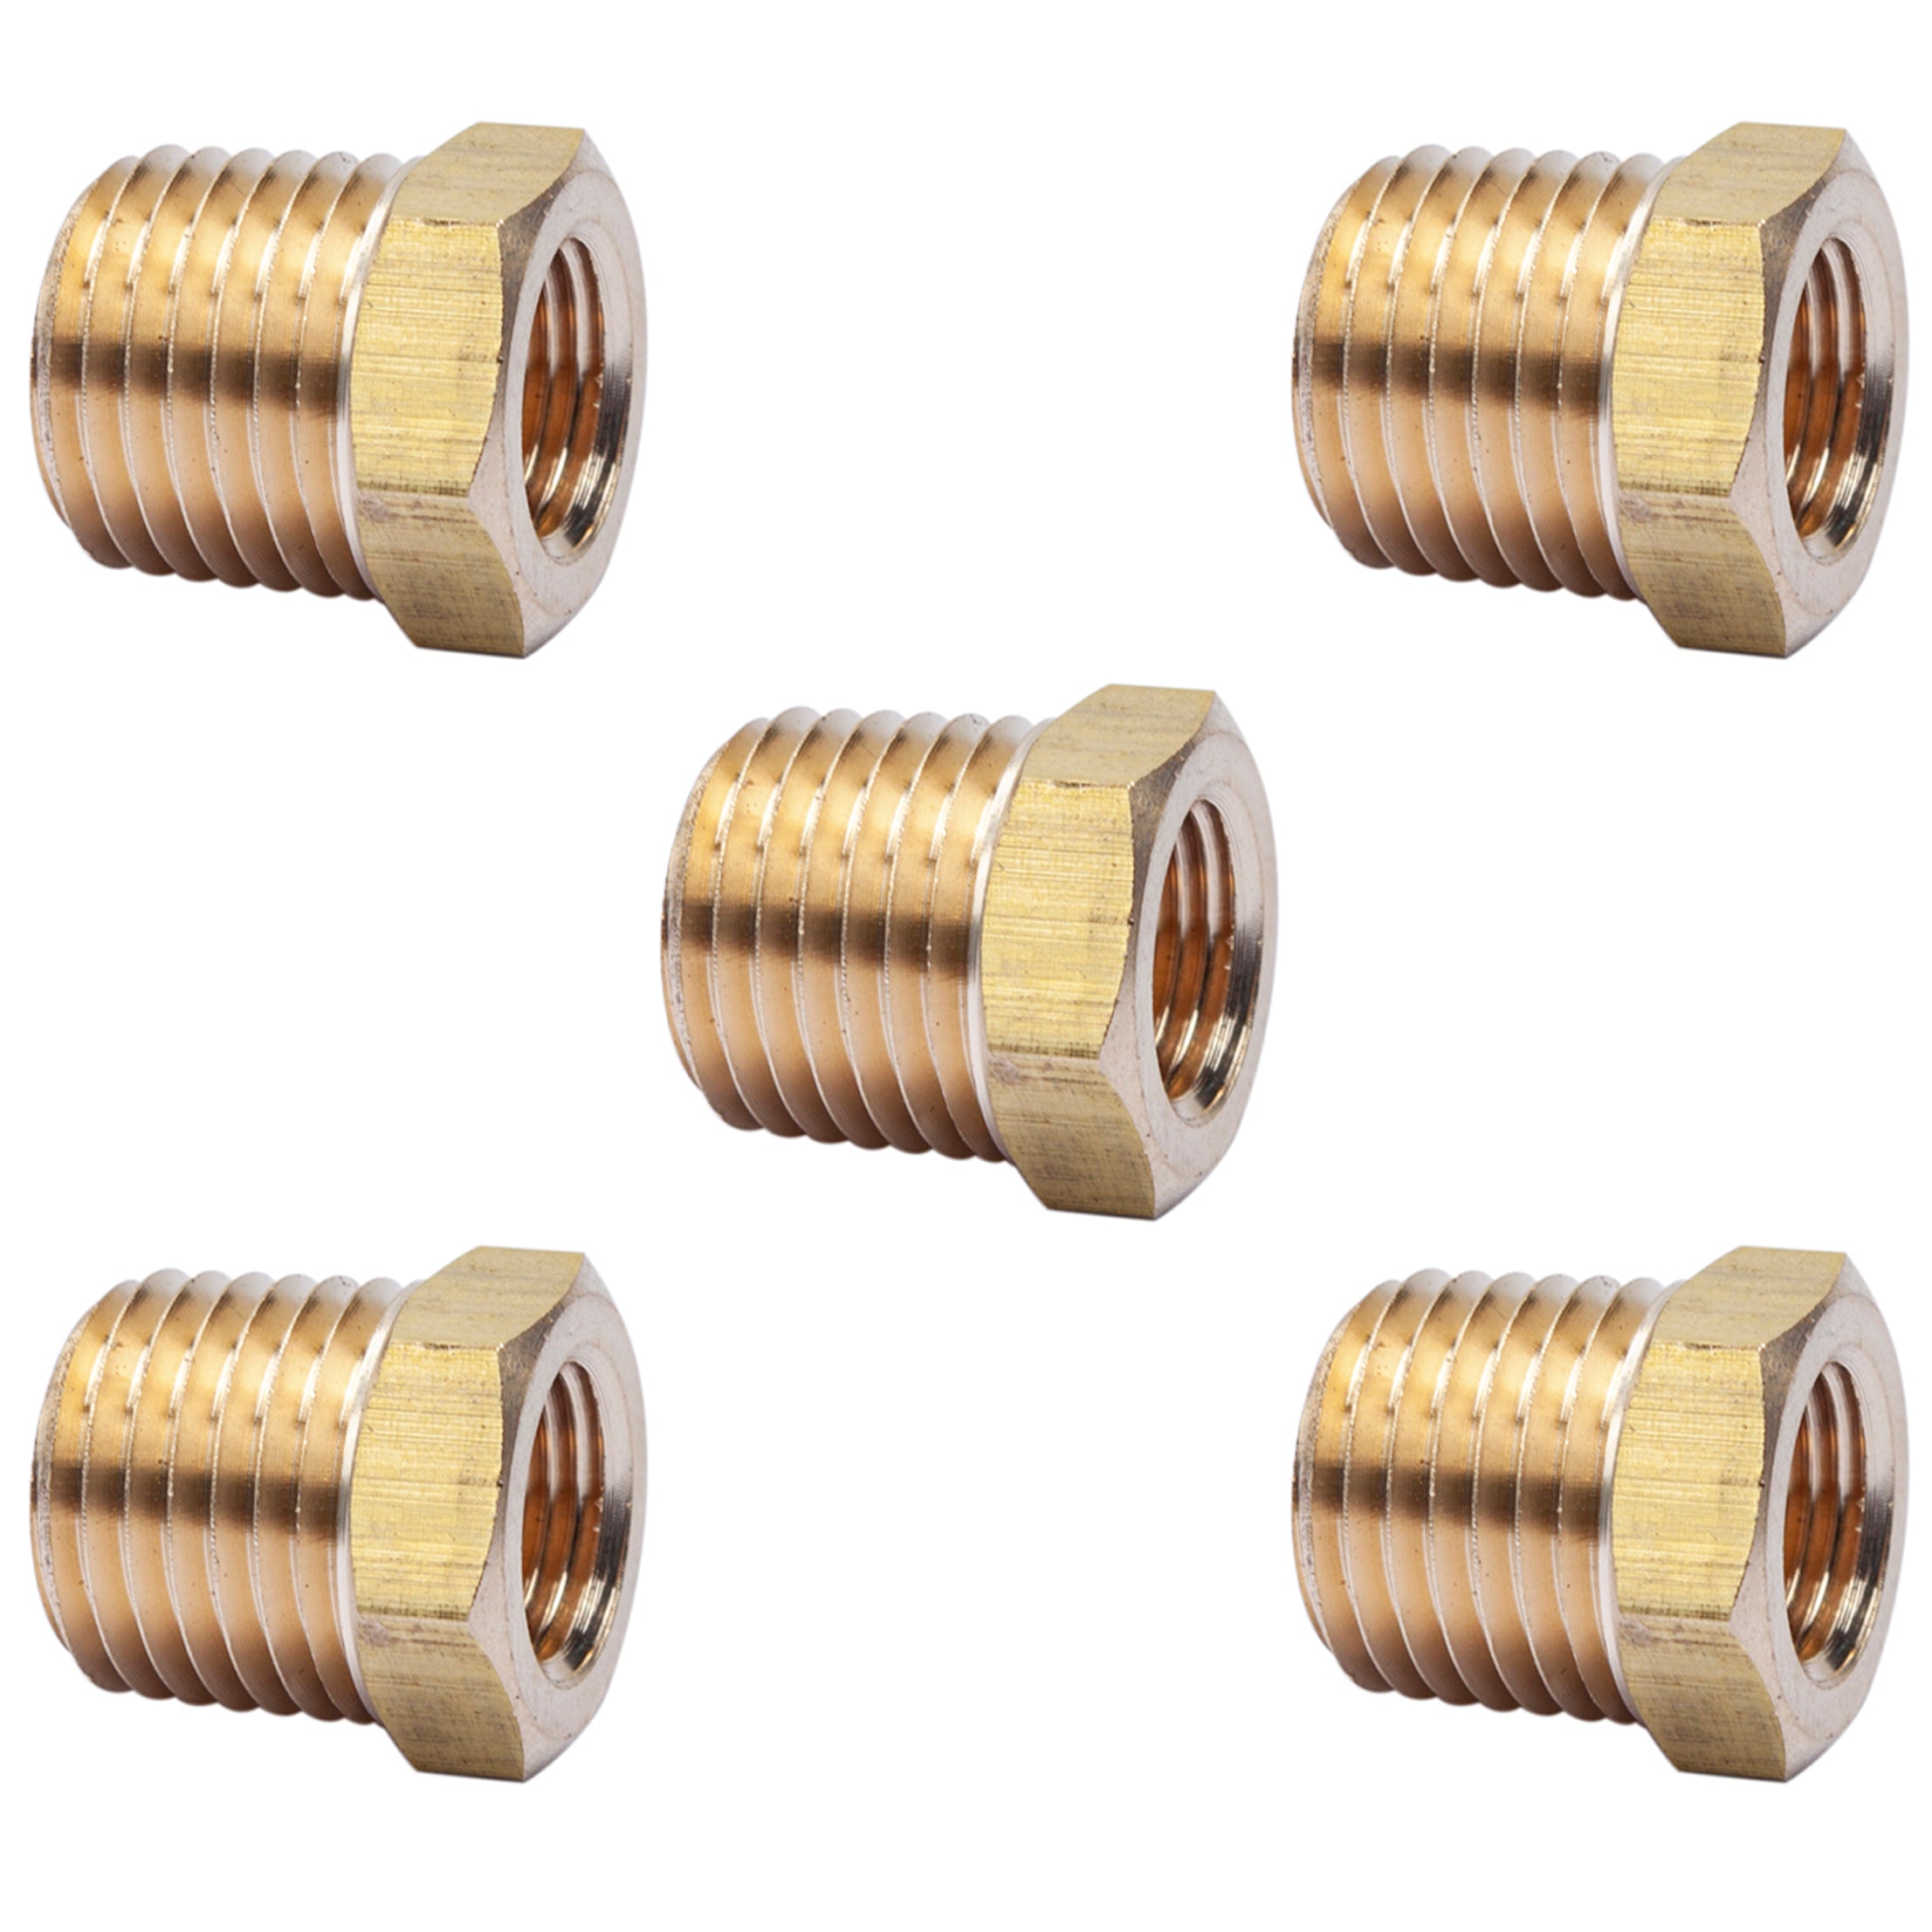 LTWFITTING Lead Free Brass Hex Pipe Bushing Reducer Fittings 1/4 Inch Male x 1/8 Inch Female NPT (Pack of 5)